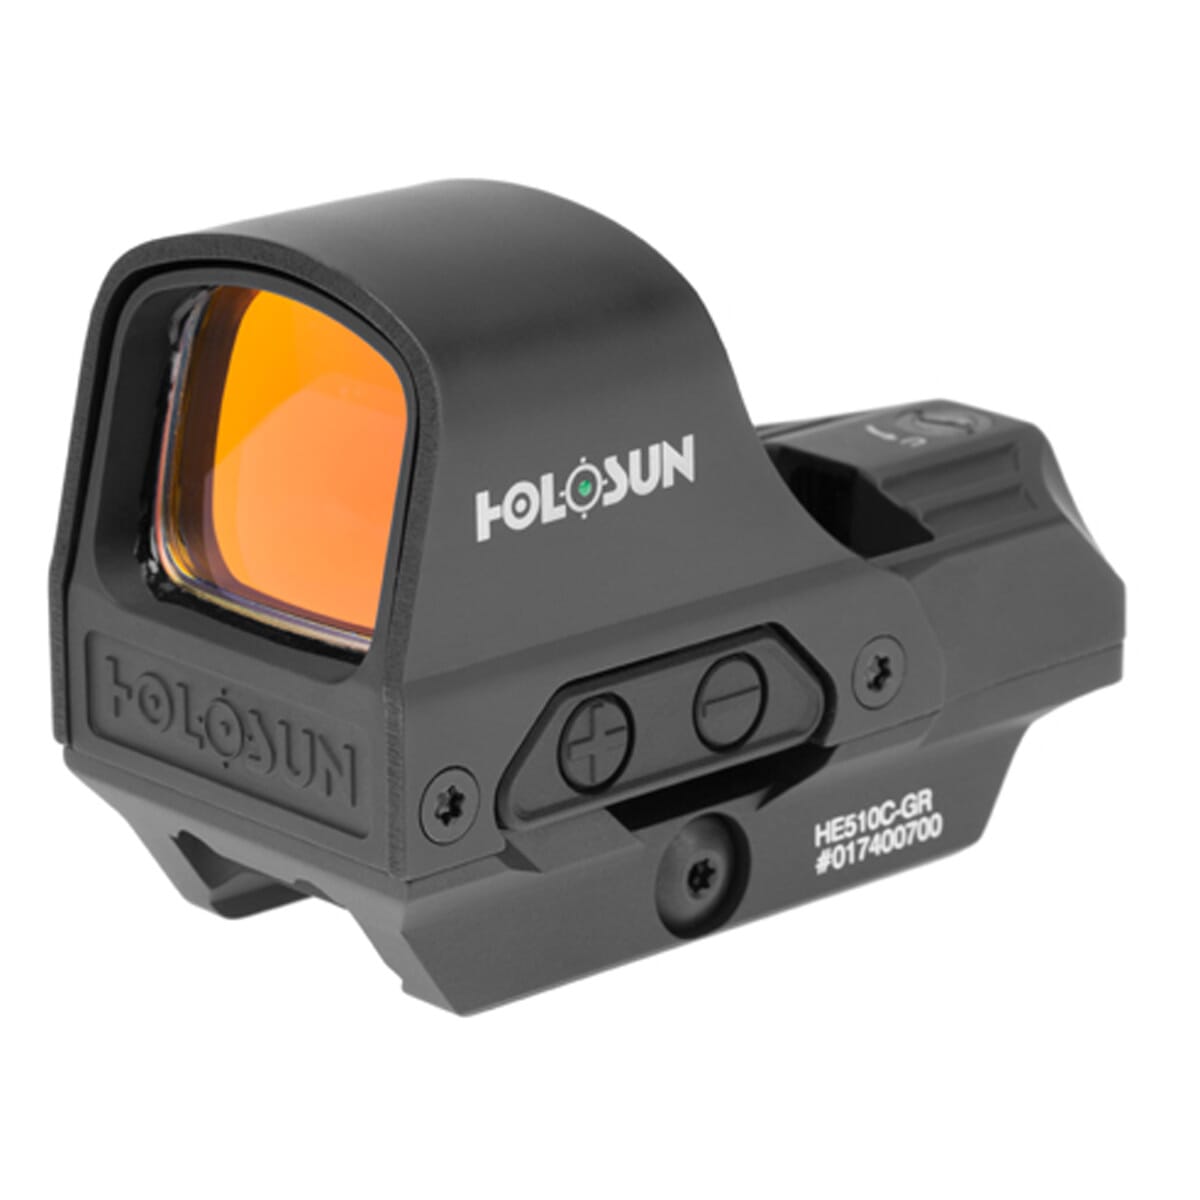 Holosun HE510C-GR Green Multi-Reticle Circle Dot Reflex Sight with Solar Failsafe and Shake Awake HE510C-GR